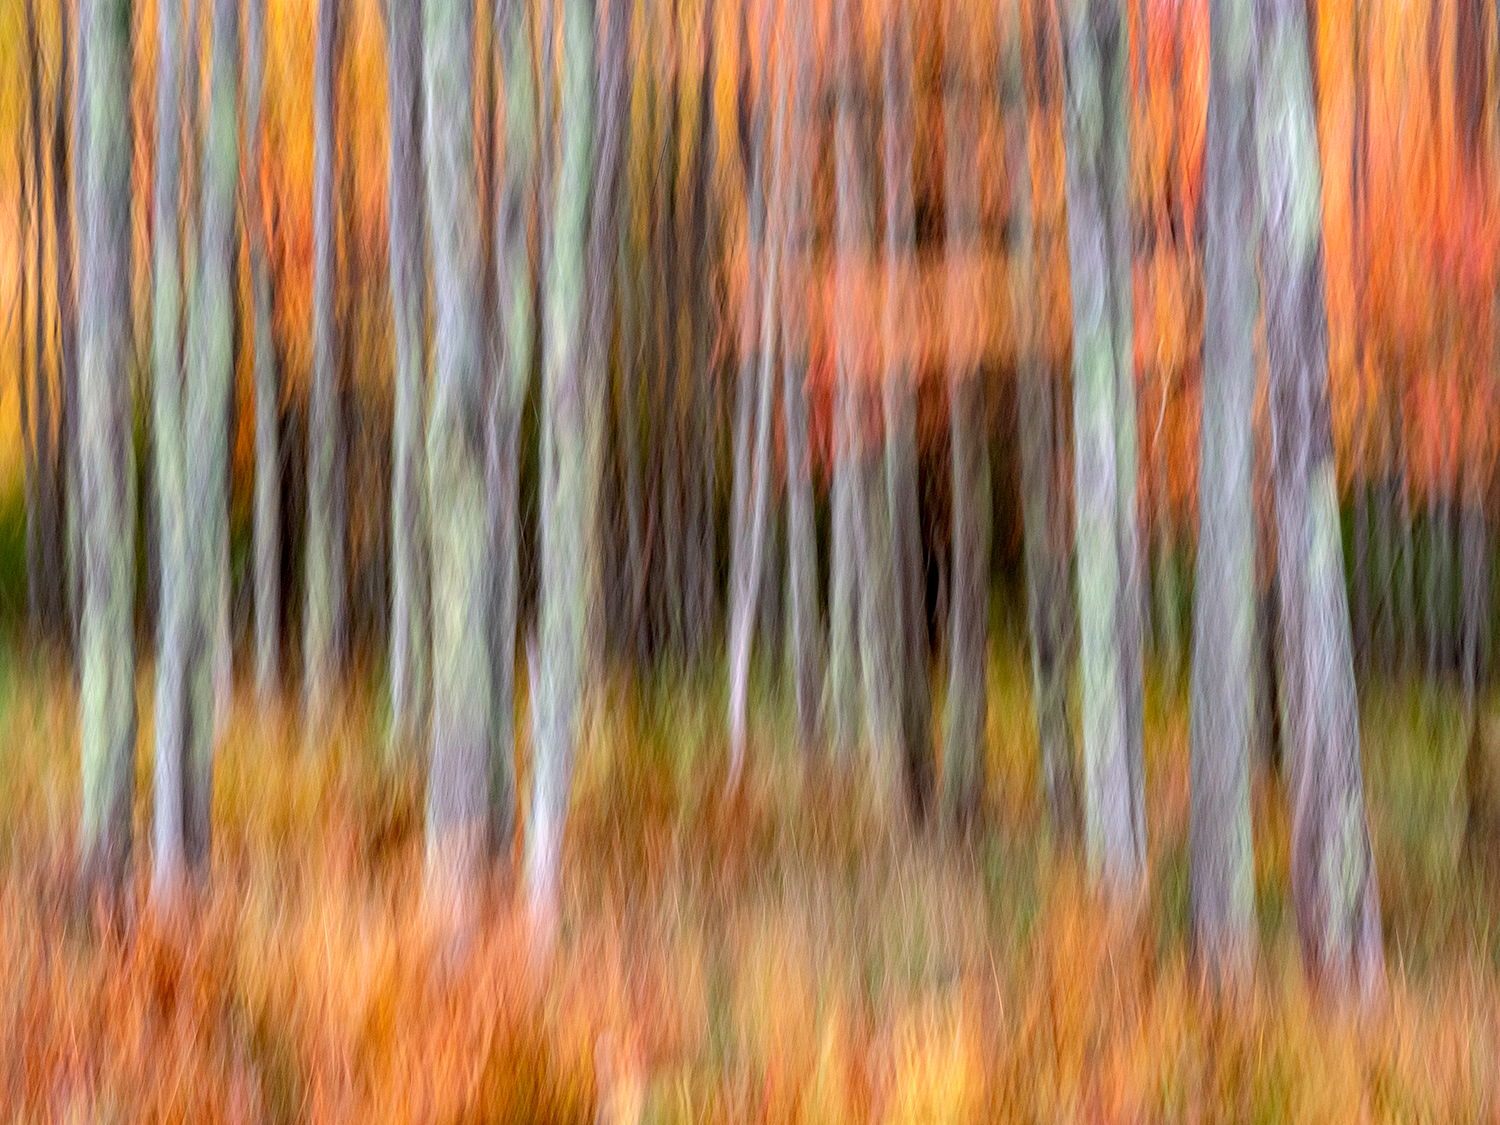 Impressionistic photographic of trees in a forest